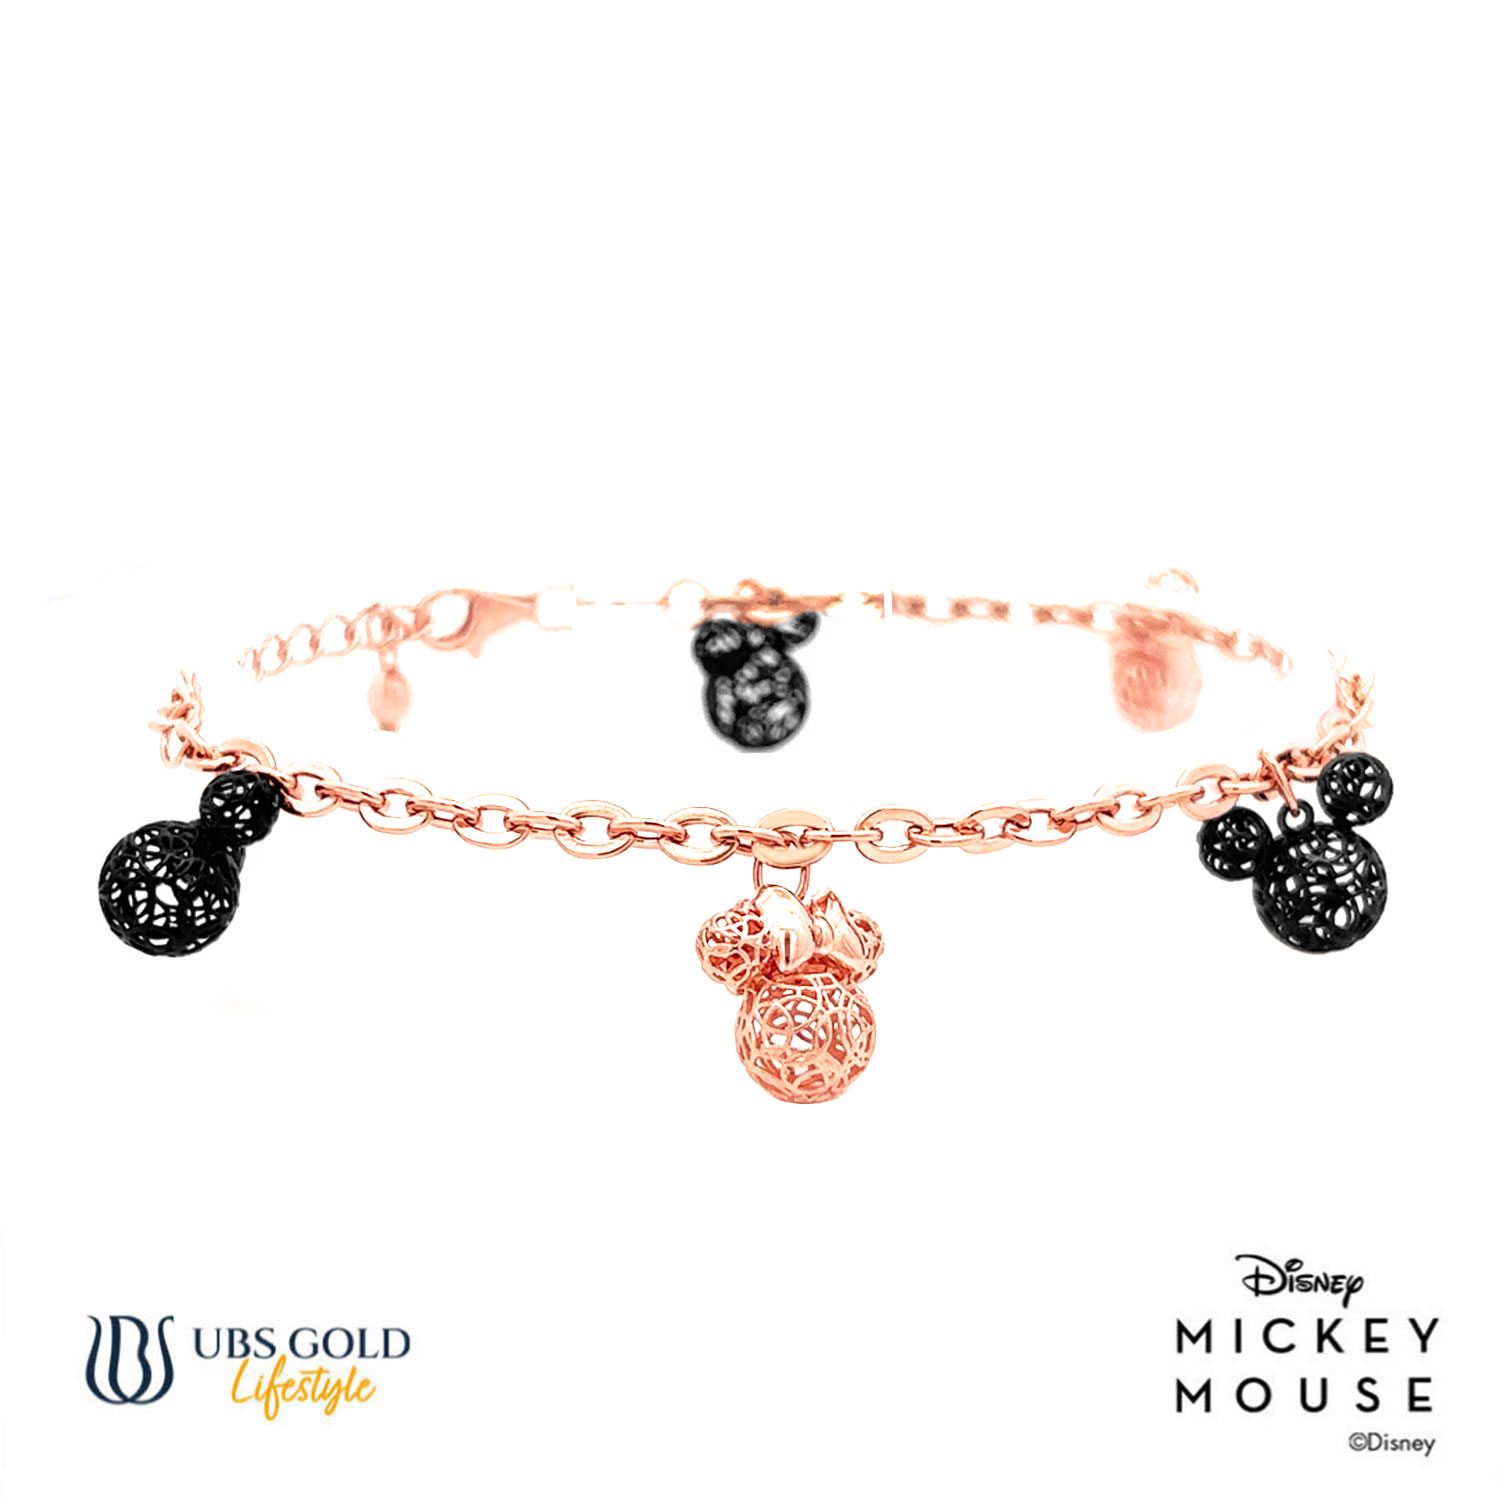 UBS Gold Gelang Emas Disney Mickey Minnie Mouse - Hgy0146 - 17K